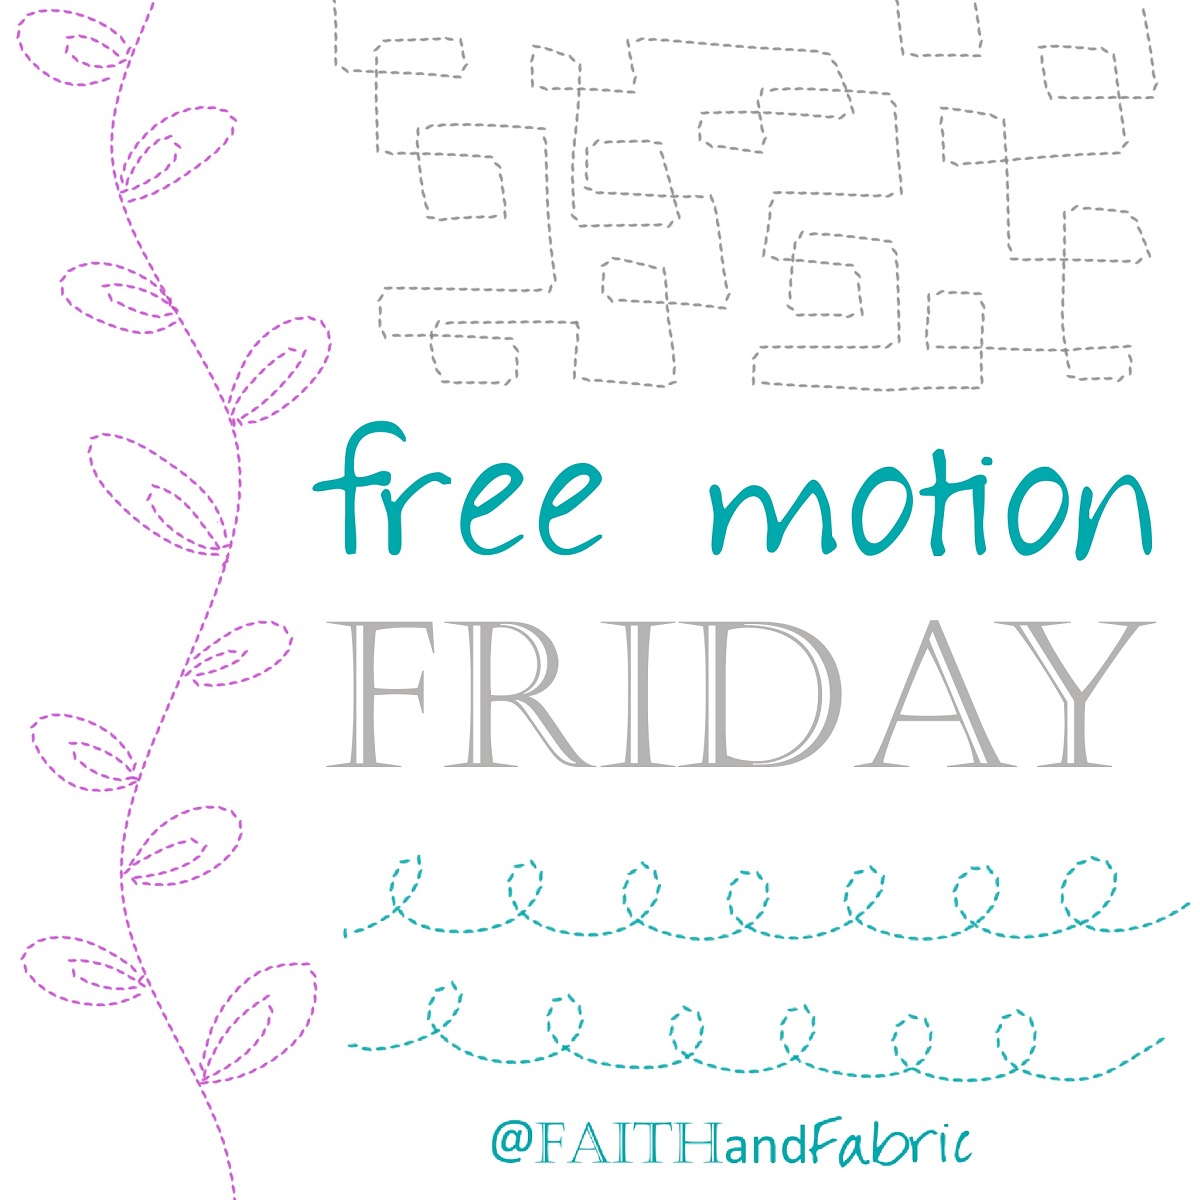 Free Motion Friday with Faith and Fabric